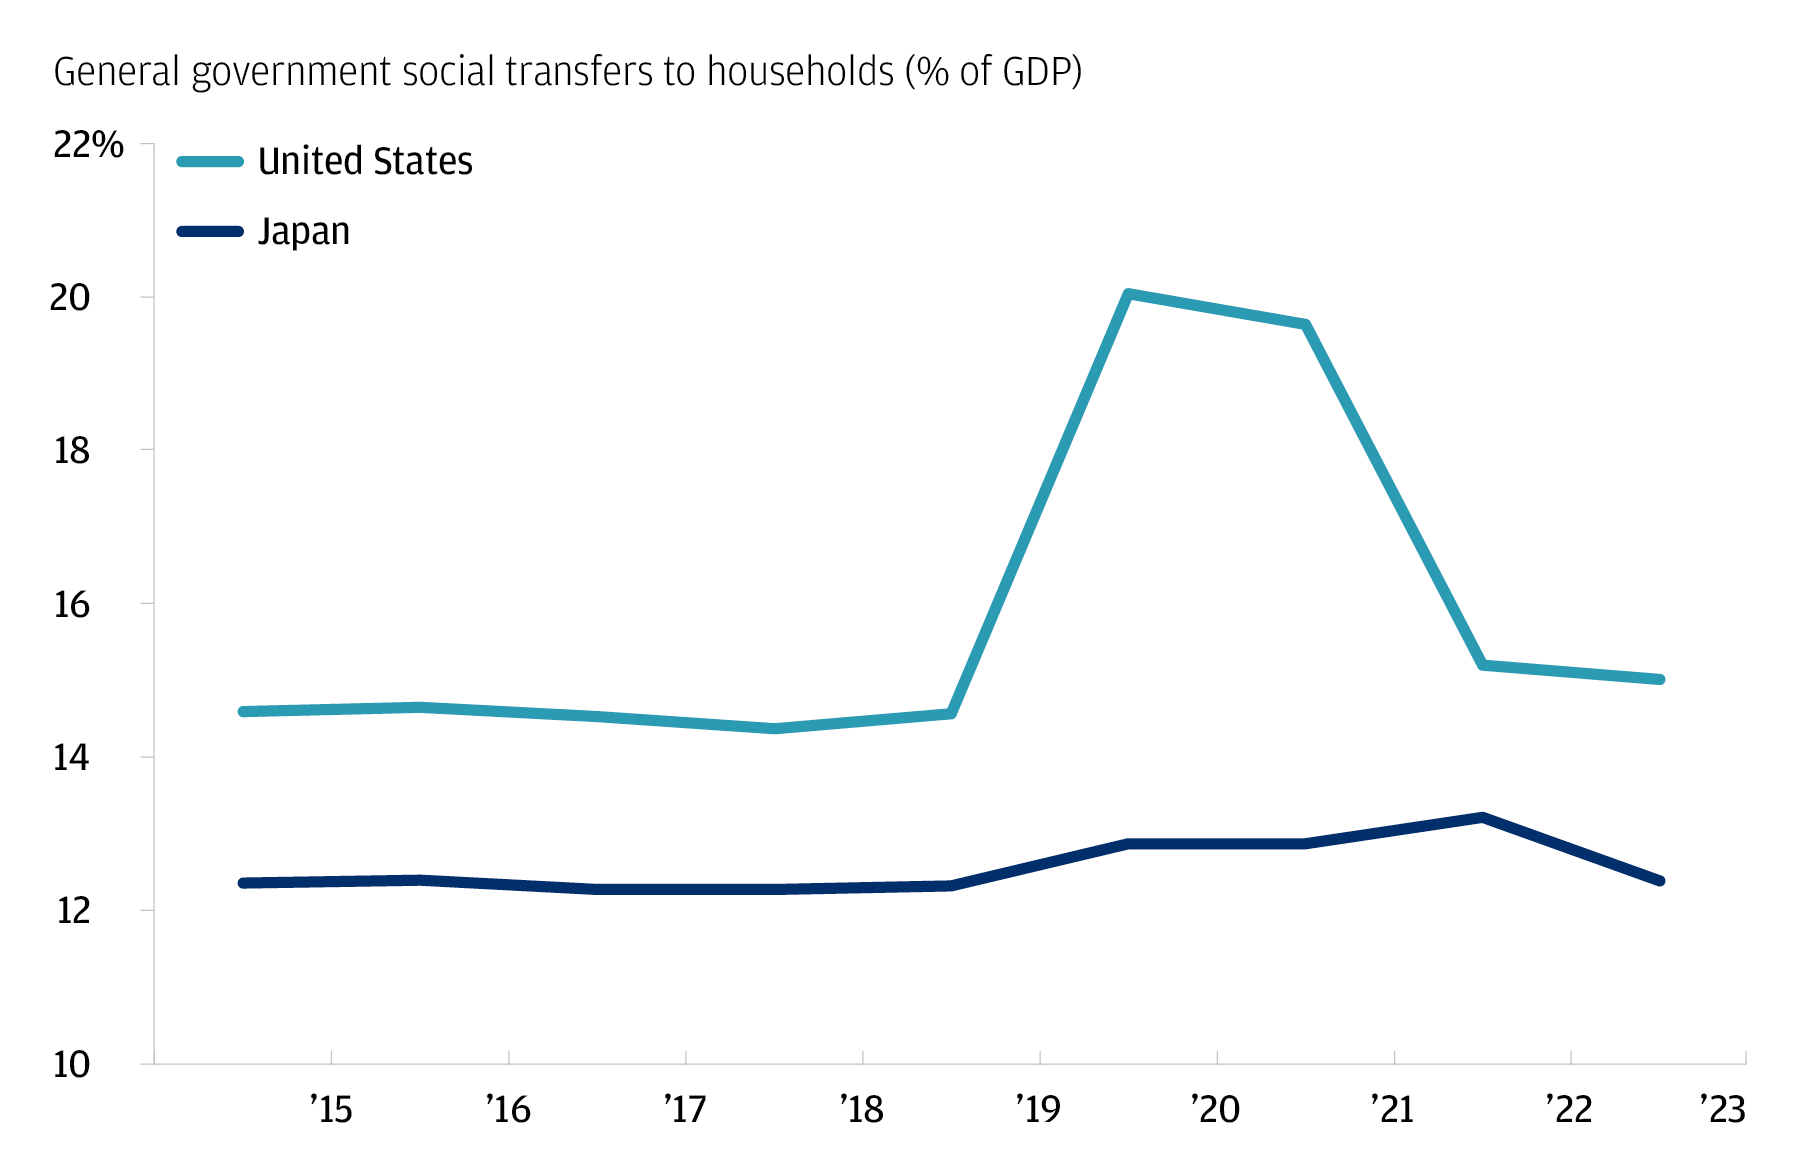 The line chart describes the general government social transfers to households as a % of GDP for Japan and U.S.